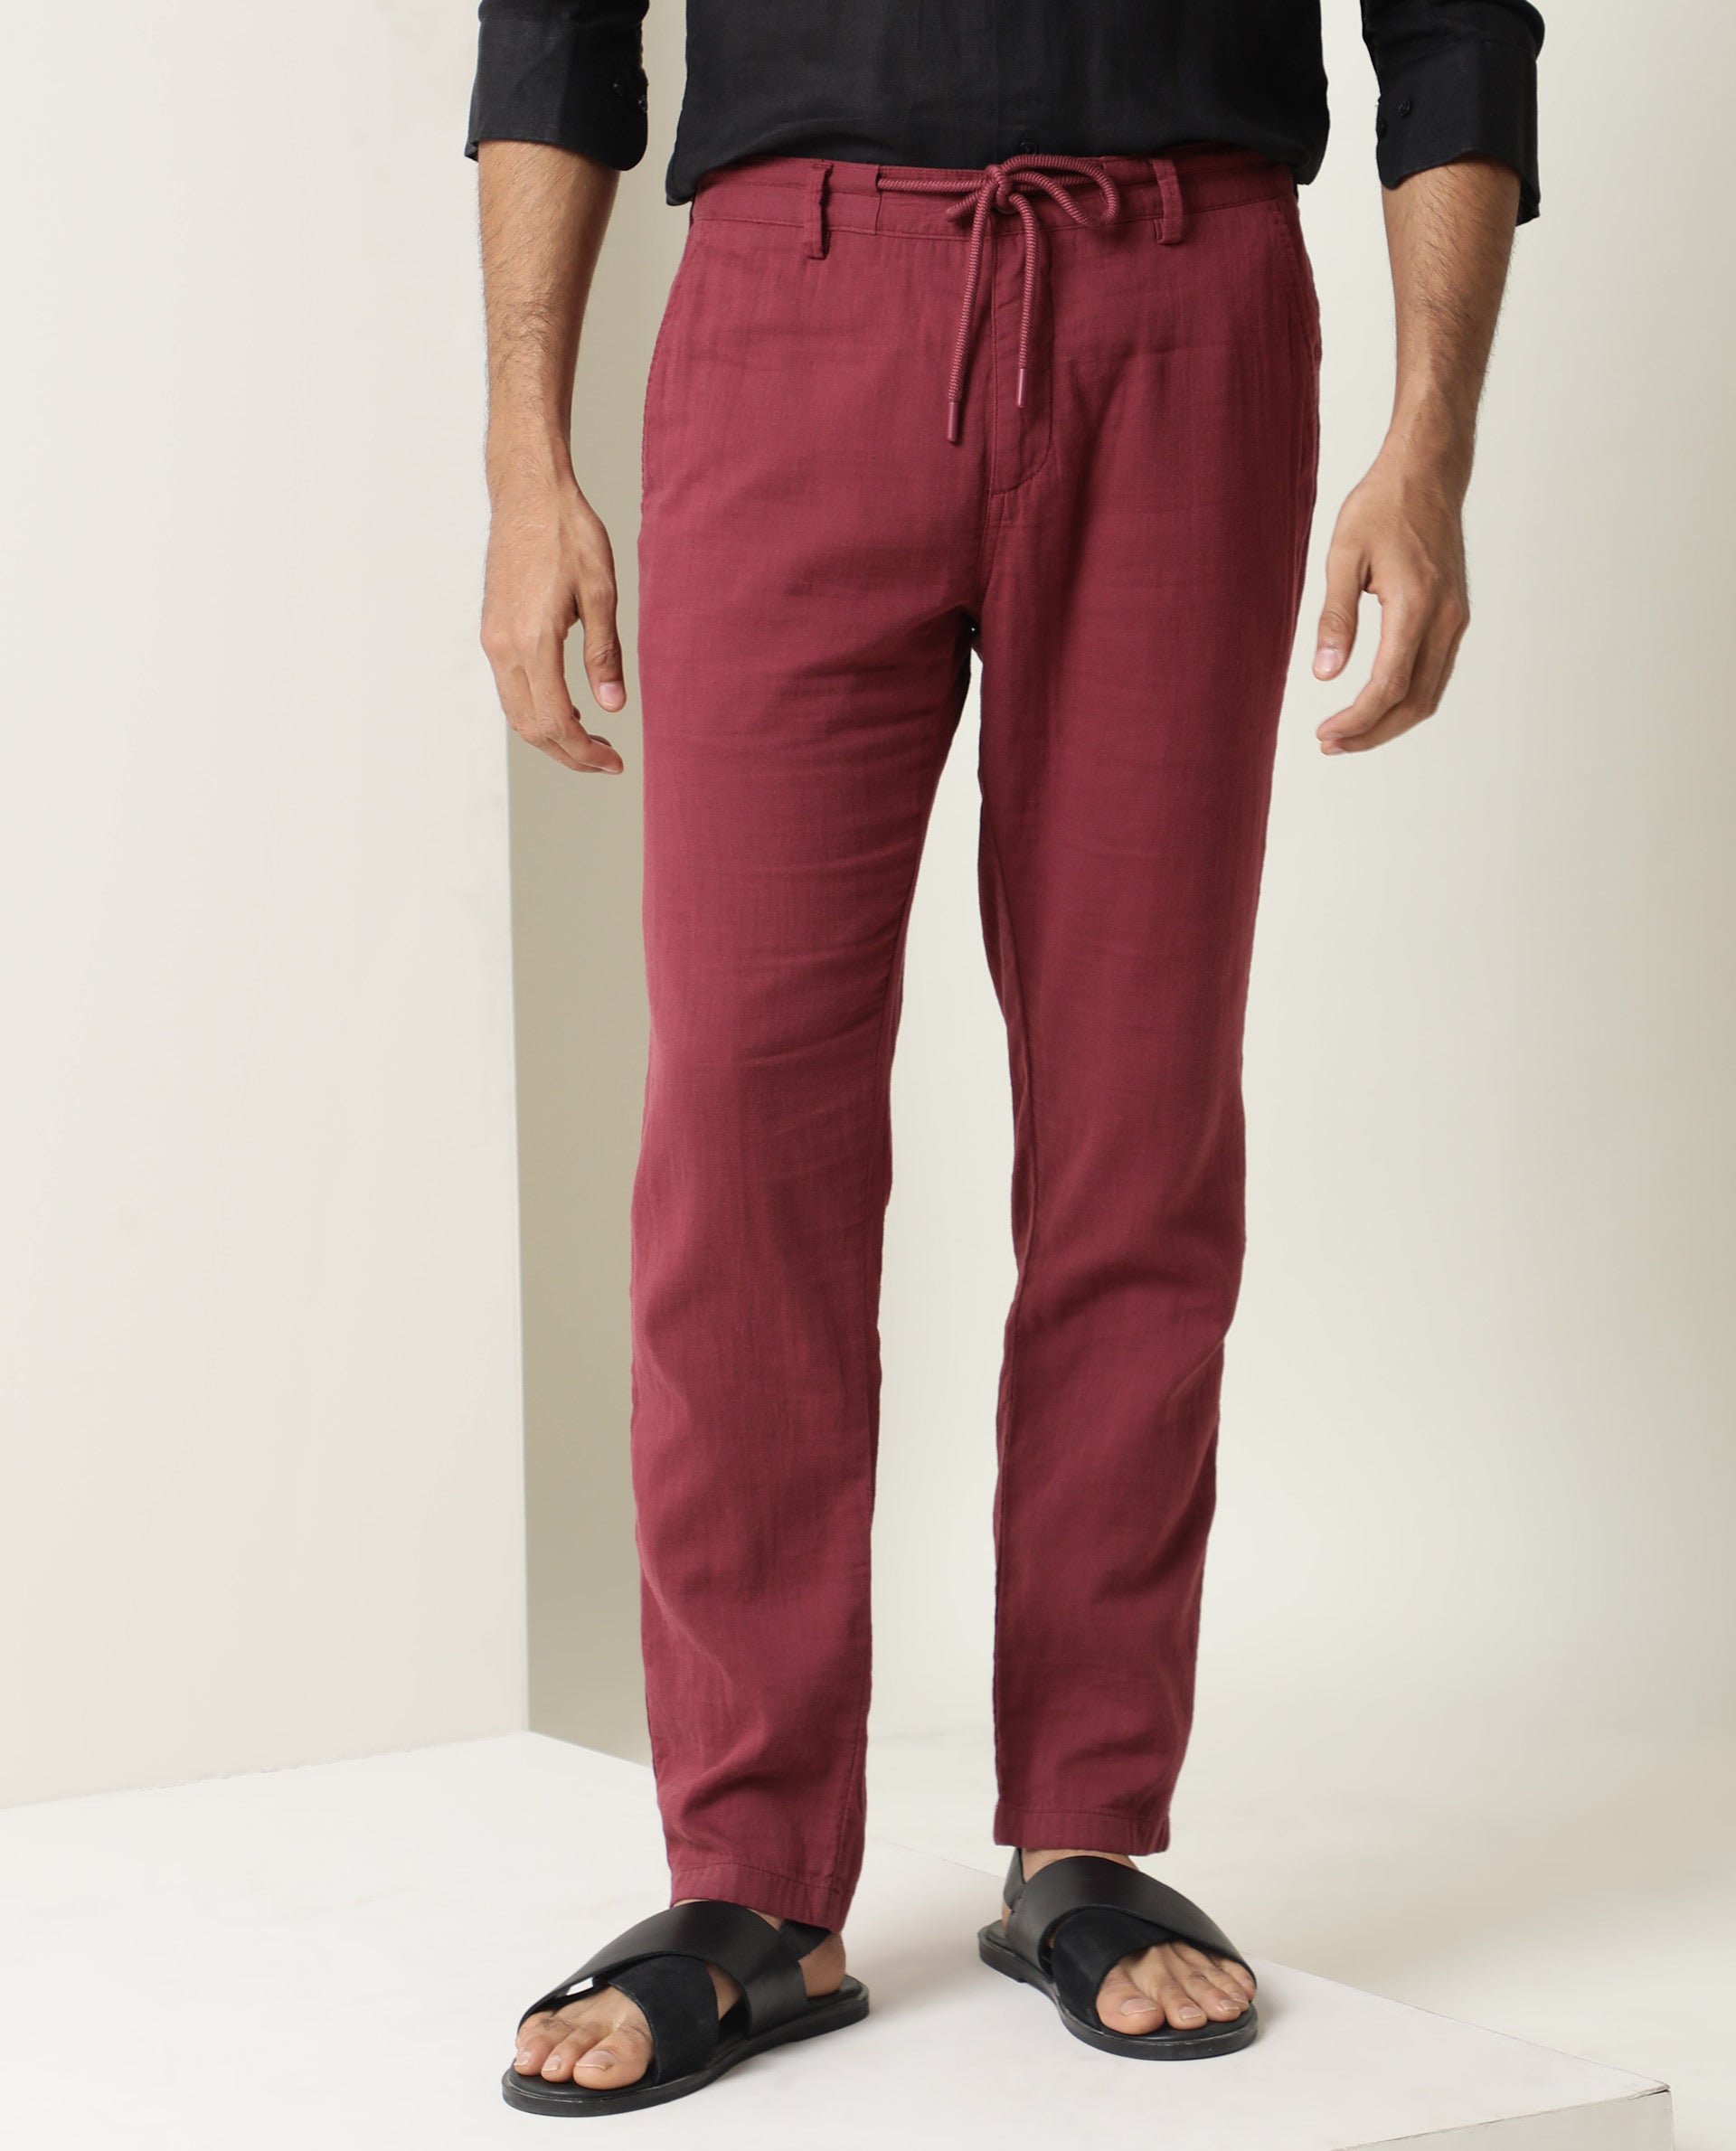 Buy Red Trousers  Pants for Men by The Indian Garage Co Online  Ajiocom